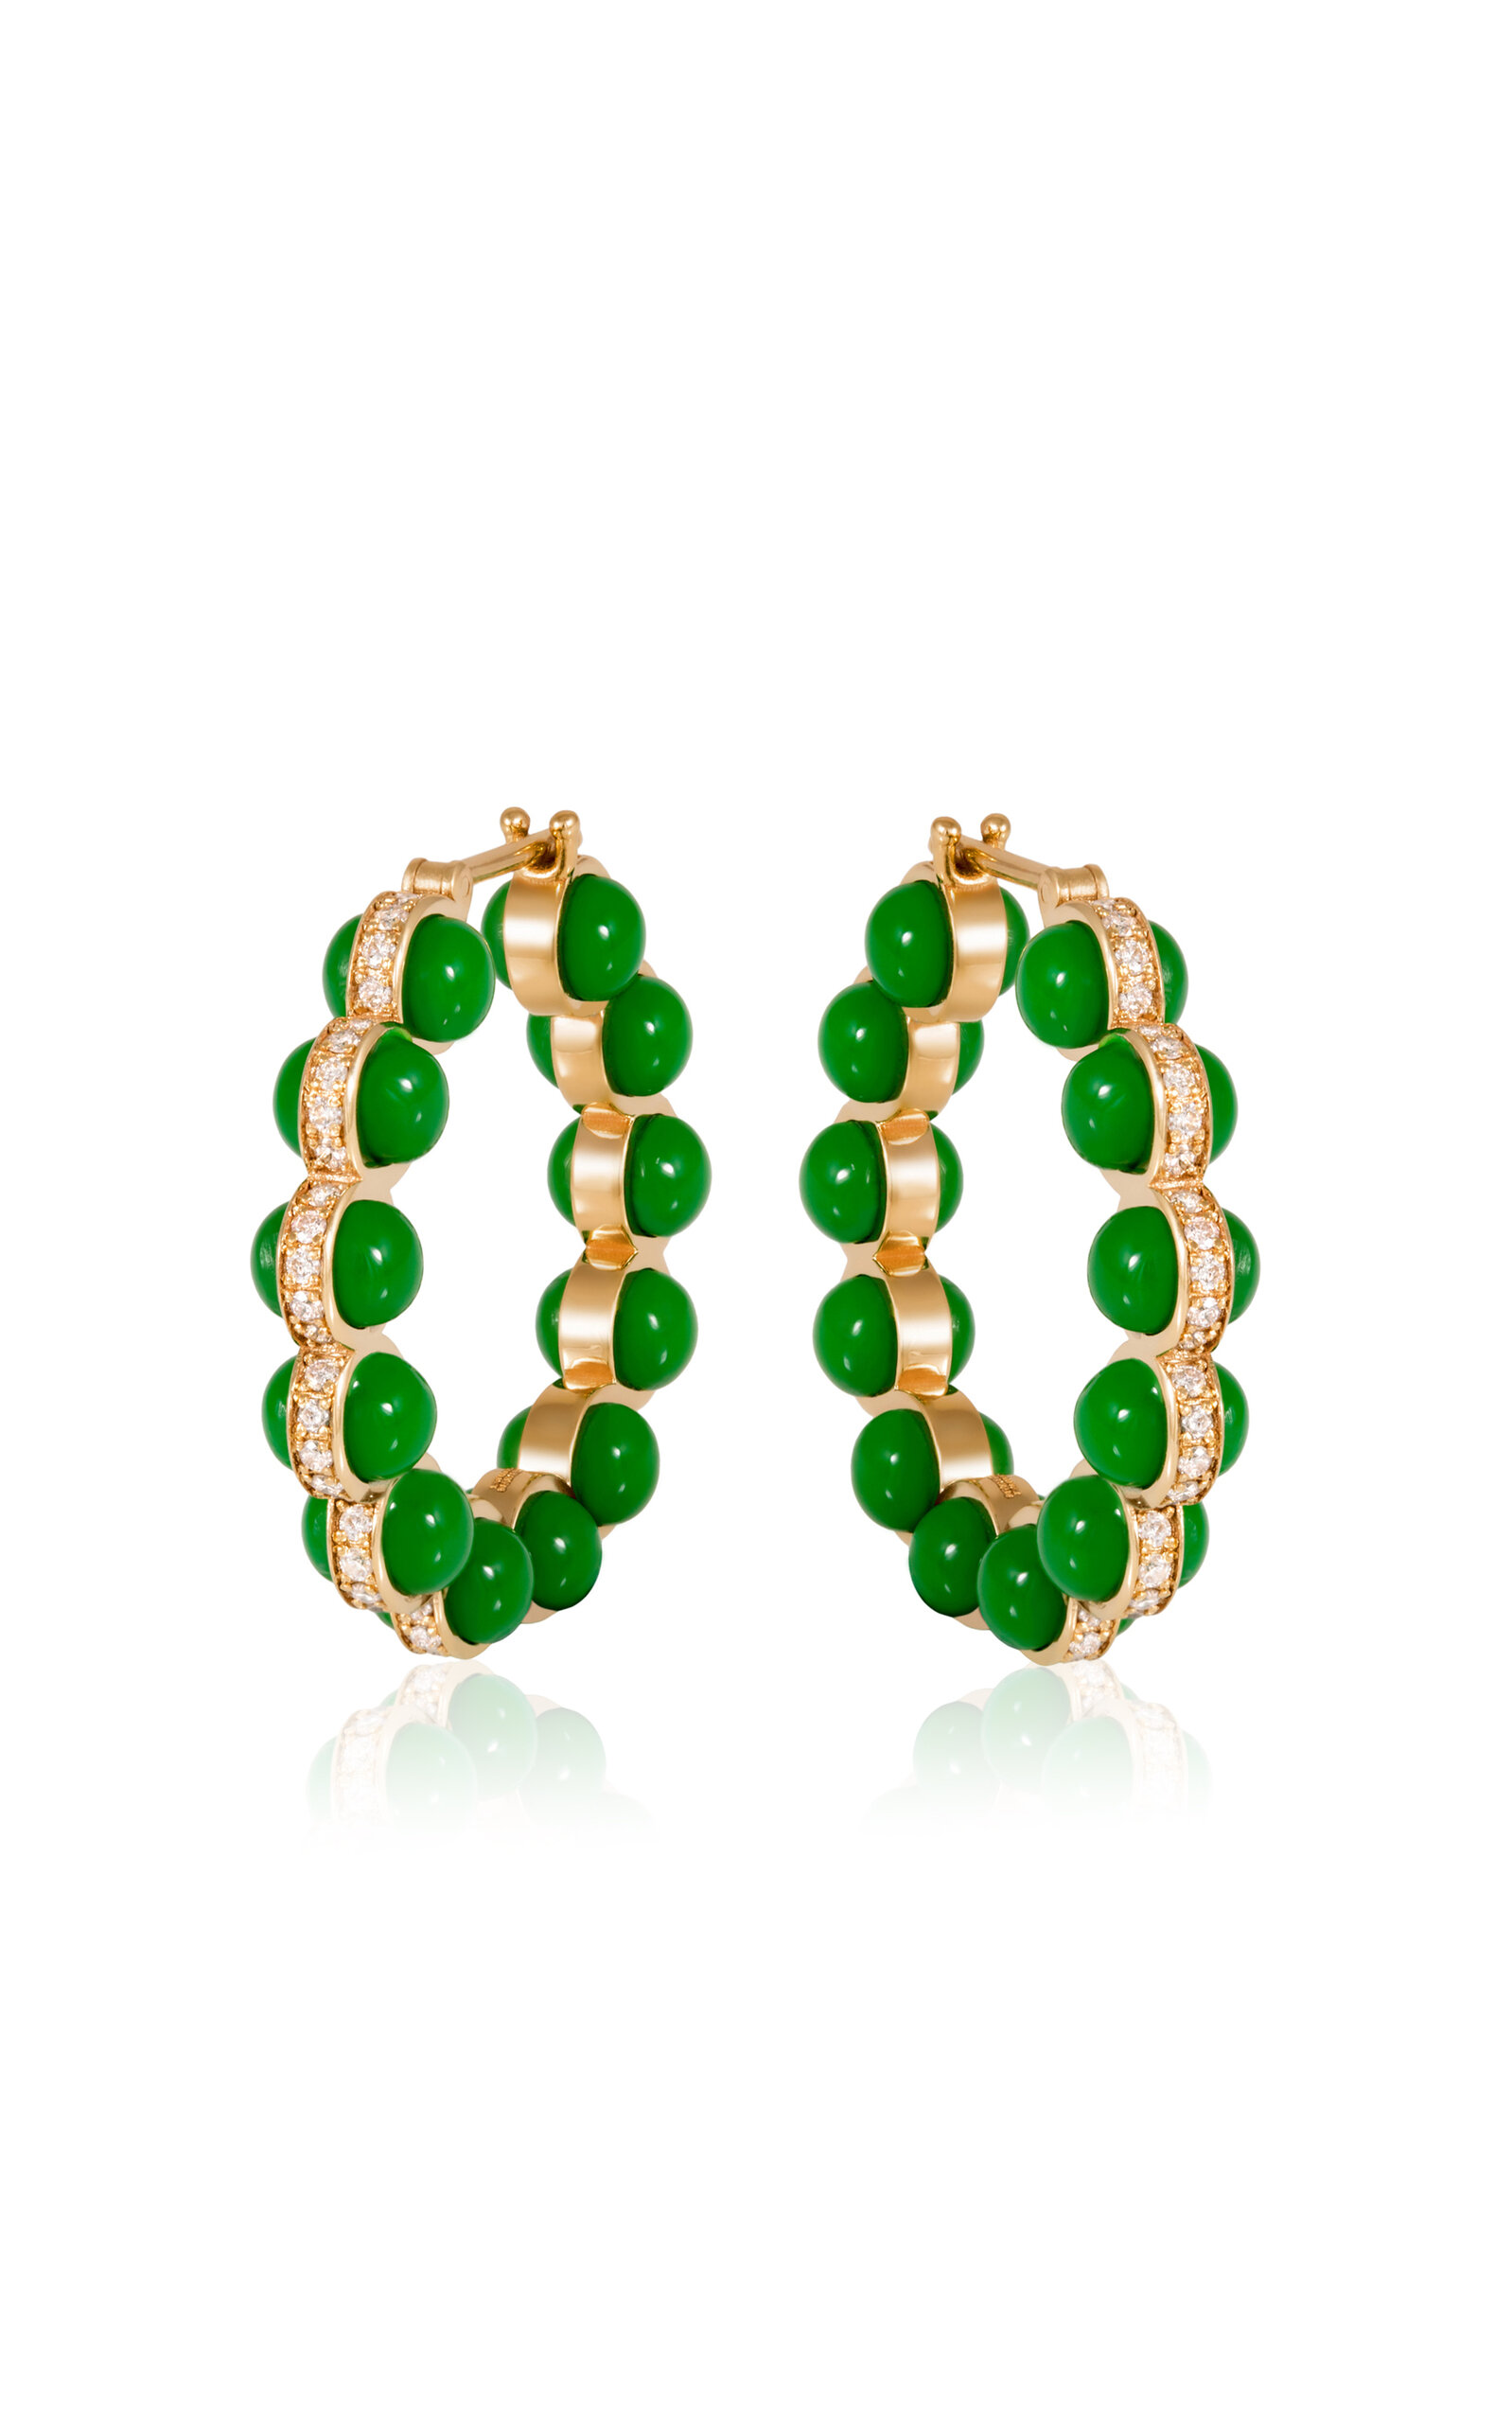 L'Atelier Nawbar Yellow Gold, Diamond and Mother-of-Pearl Bond Street Earrings - Gold - One Size